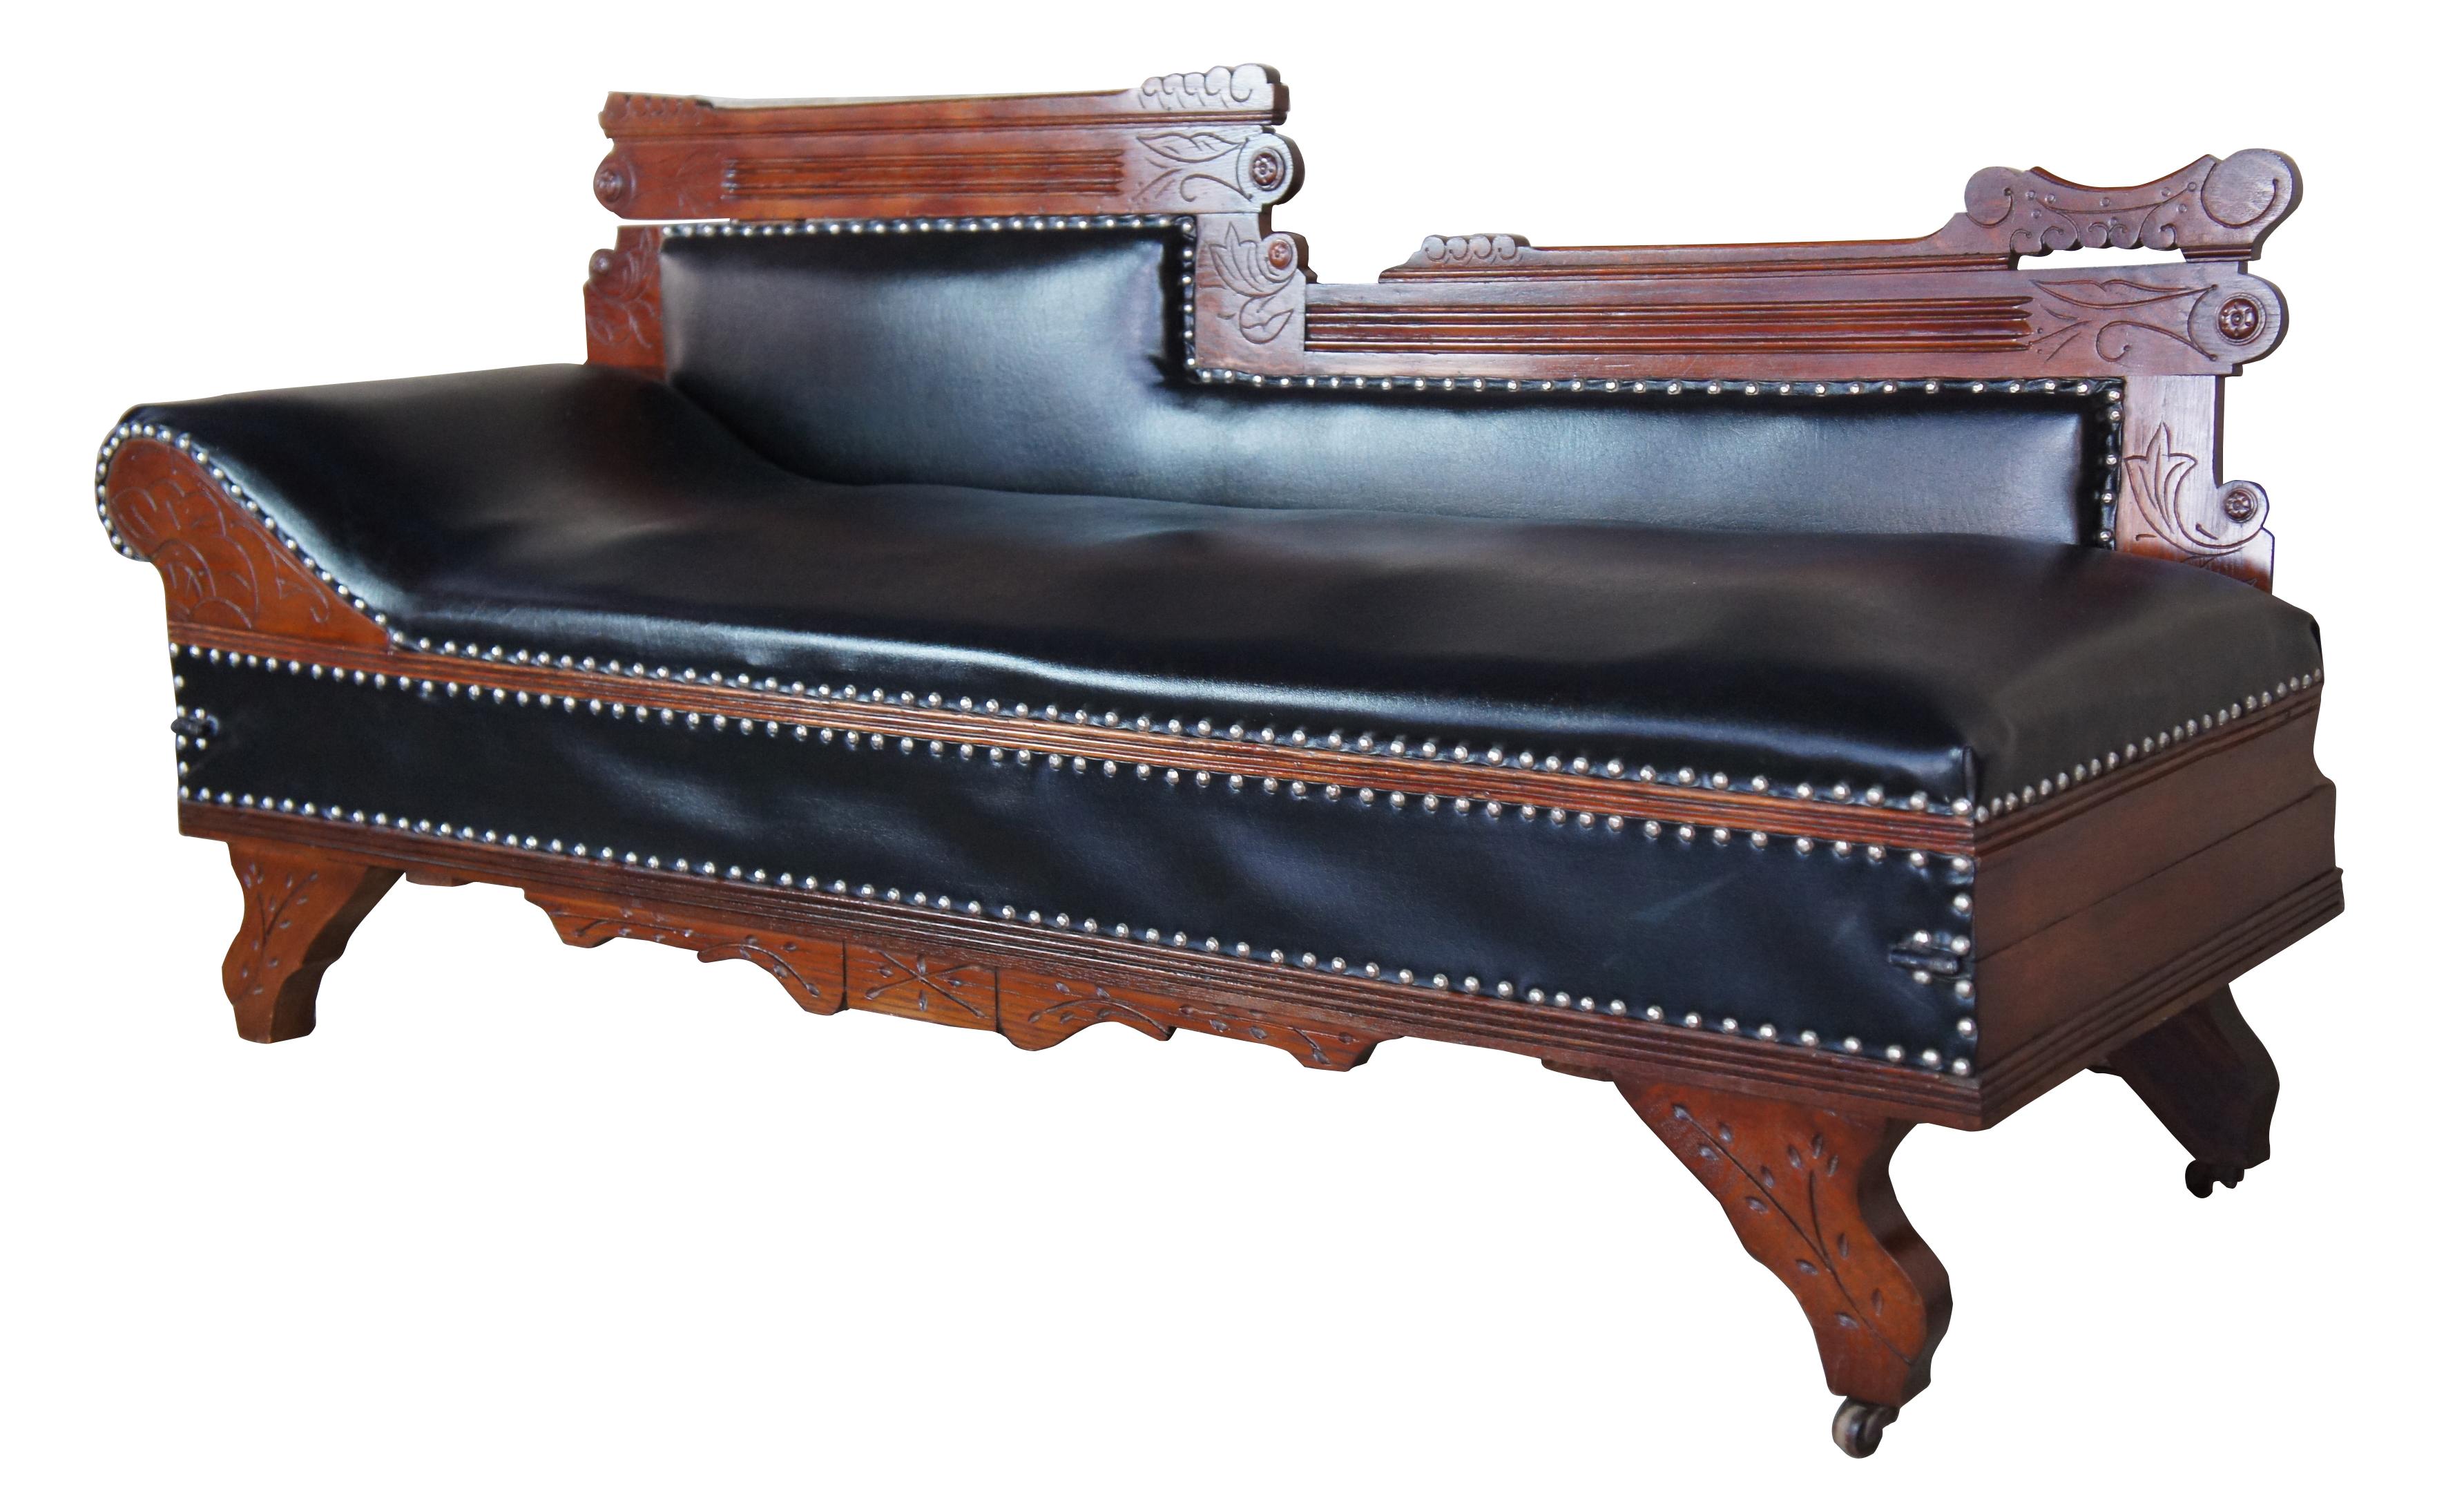 Eastlake Victorian oak leather chaise lounge fainting couch Murphy bed parlor

Eastlake chaise lounge day bed, circa 1880s. Made from red oak with carved trim and leather upholstery with nailheads. When it is not being used as a sofa or lounger,